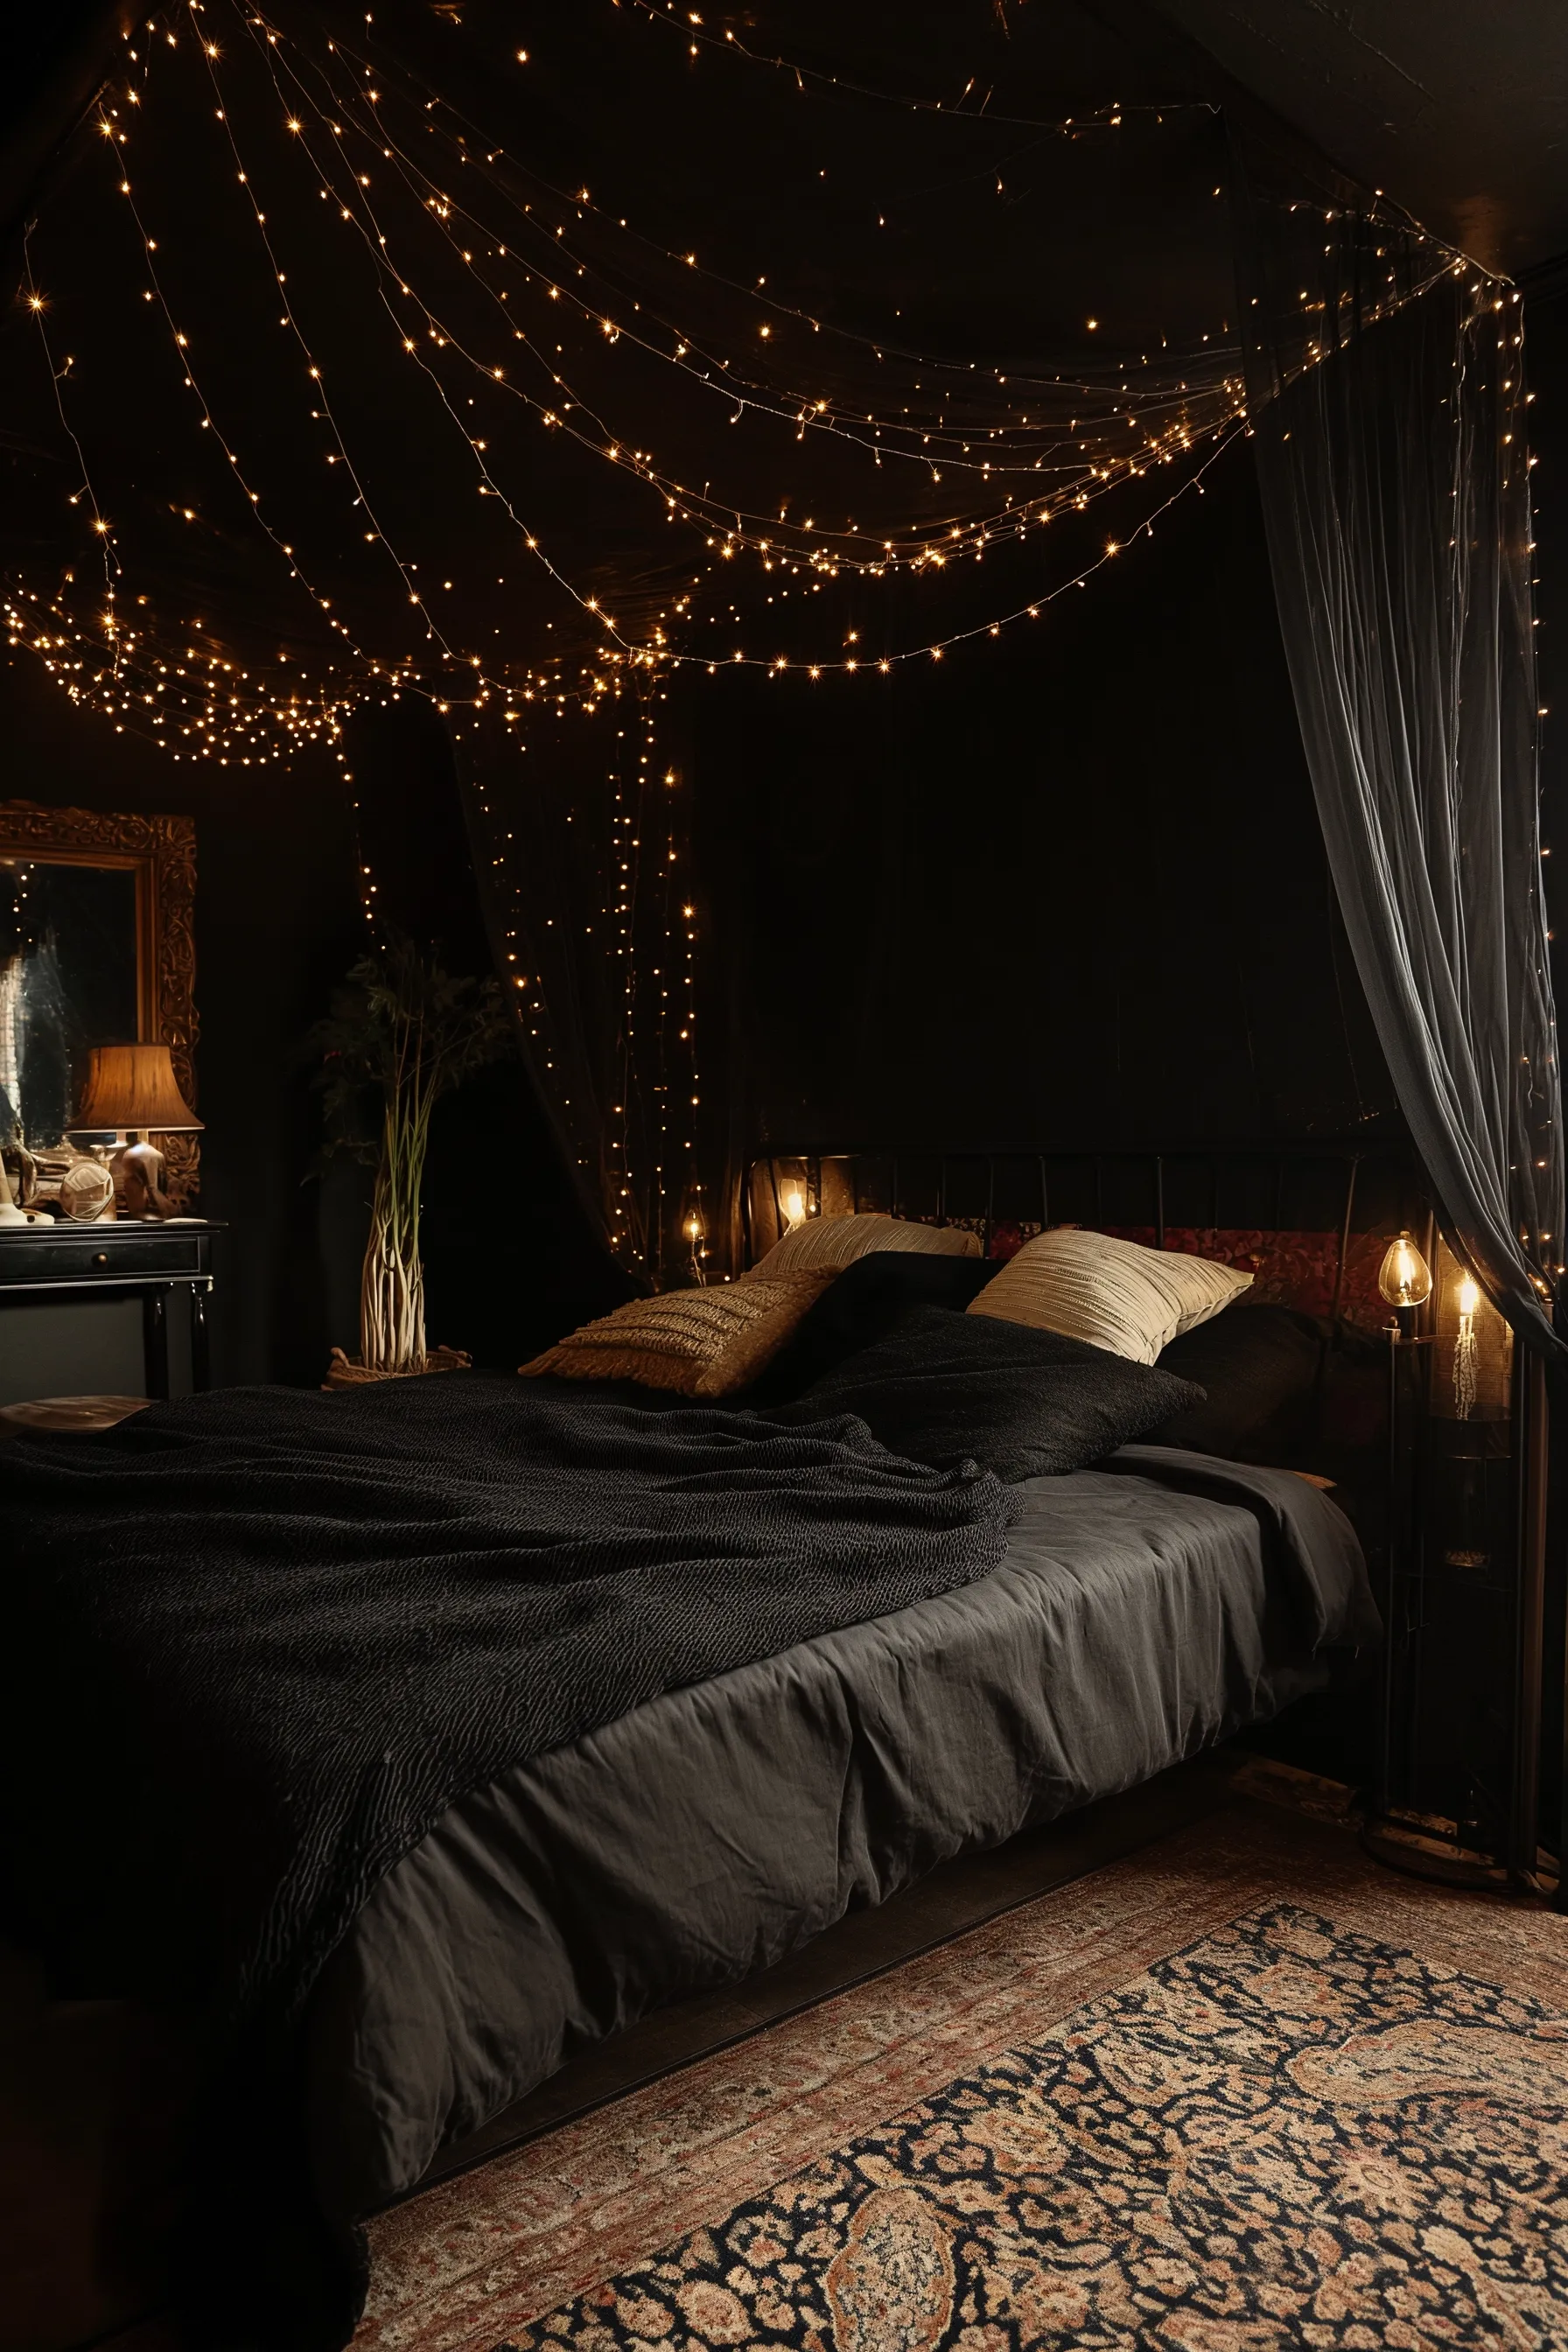 A dark boho bedroom with a canopy over the bed and fairy lights